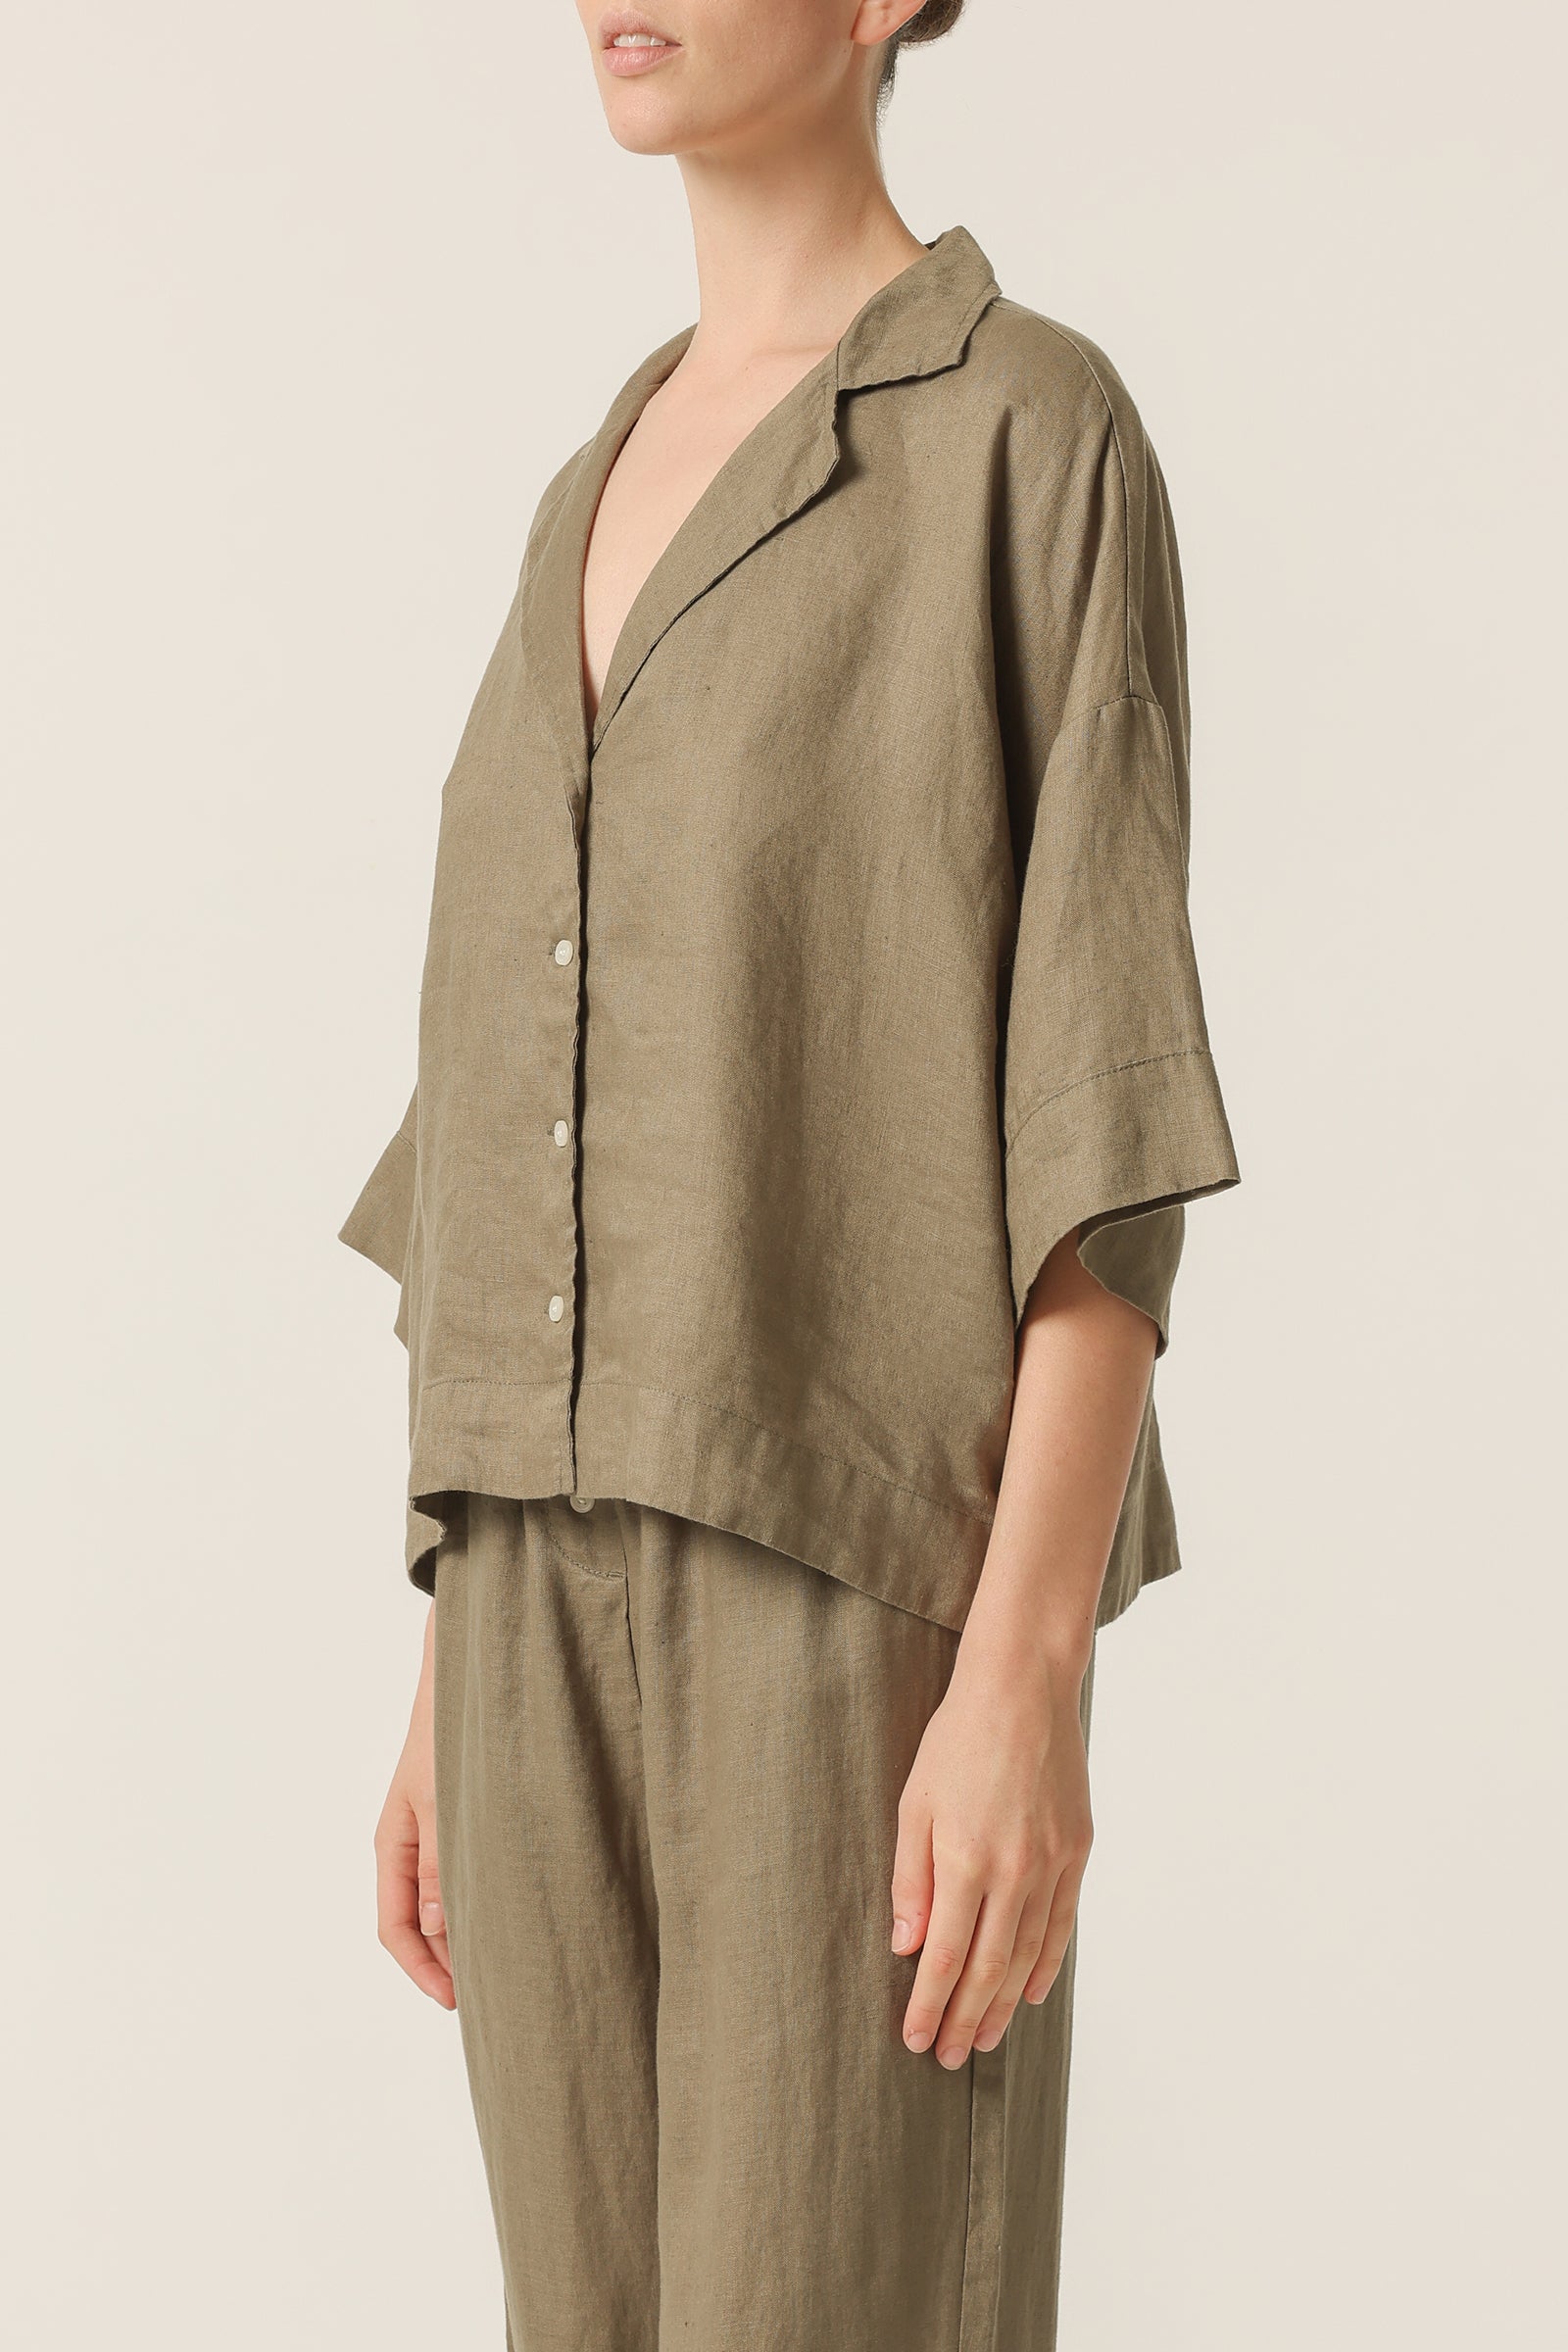 Nude Lucy Lounge Linen Shirt In a Green Willow Colour